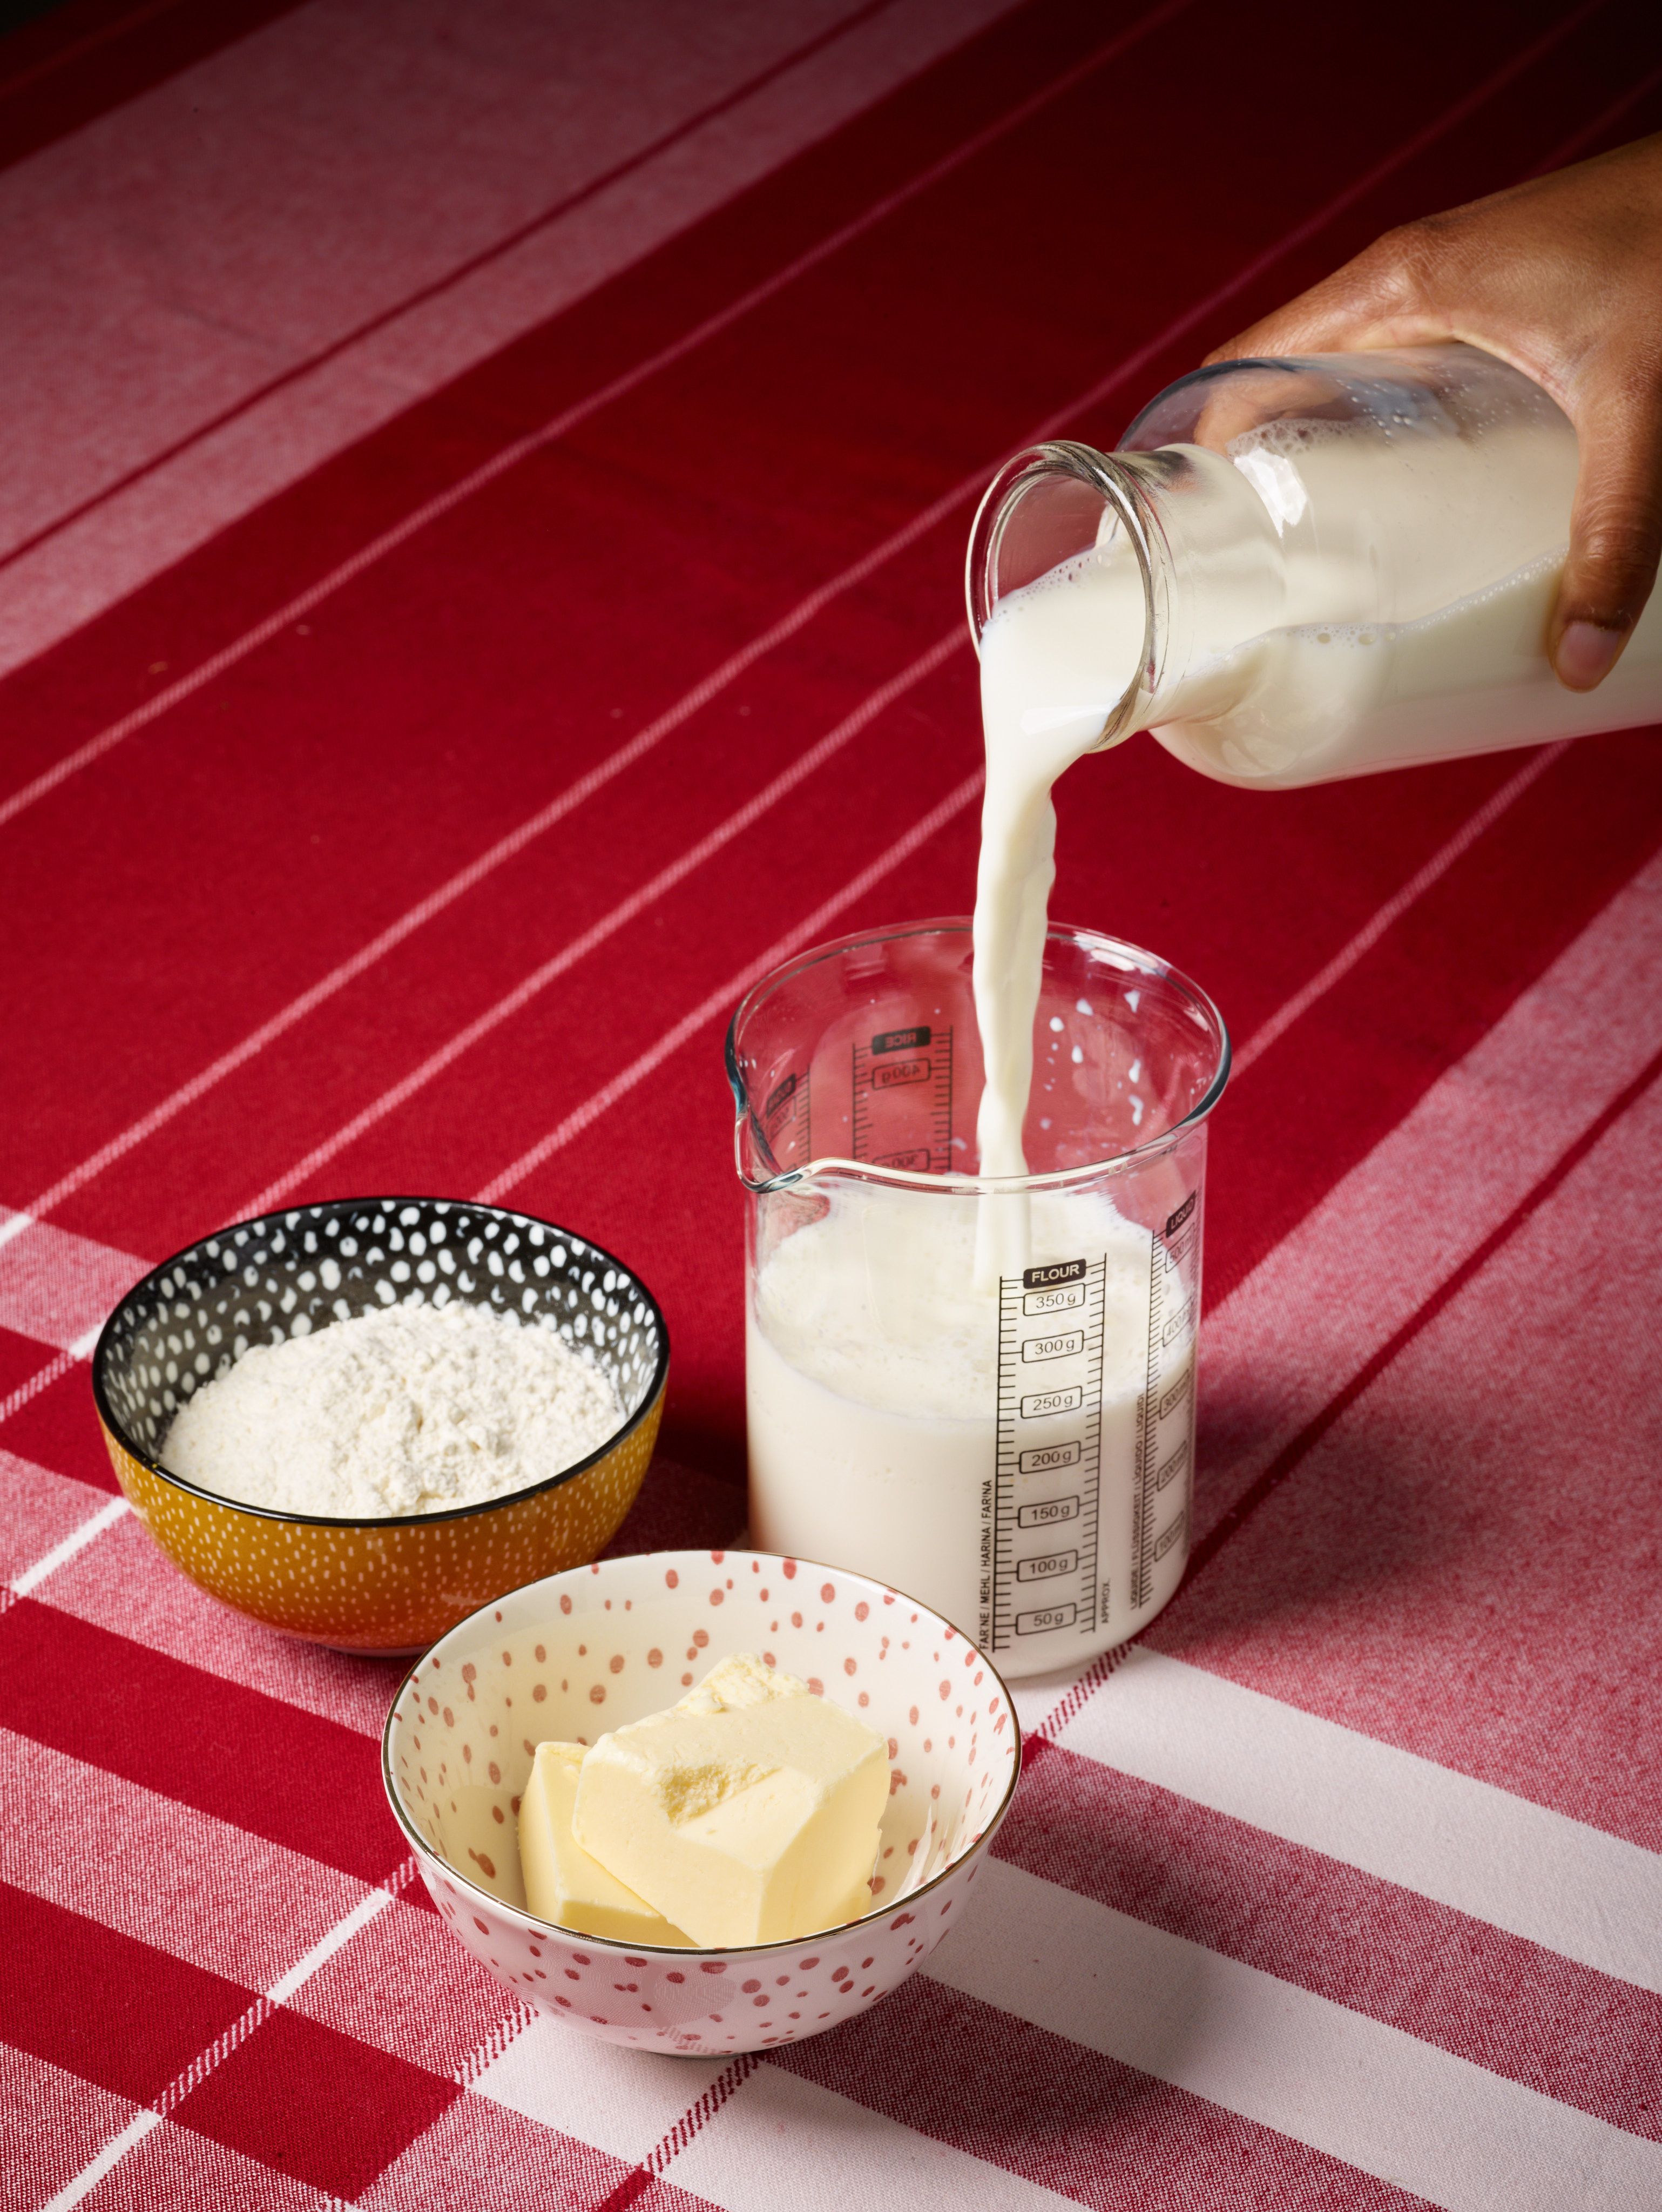 Milk being poured into a measuring cup next to bowls containing flour and butter